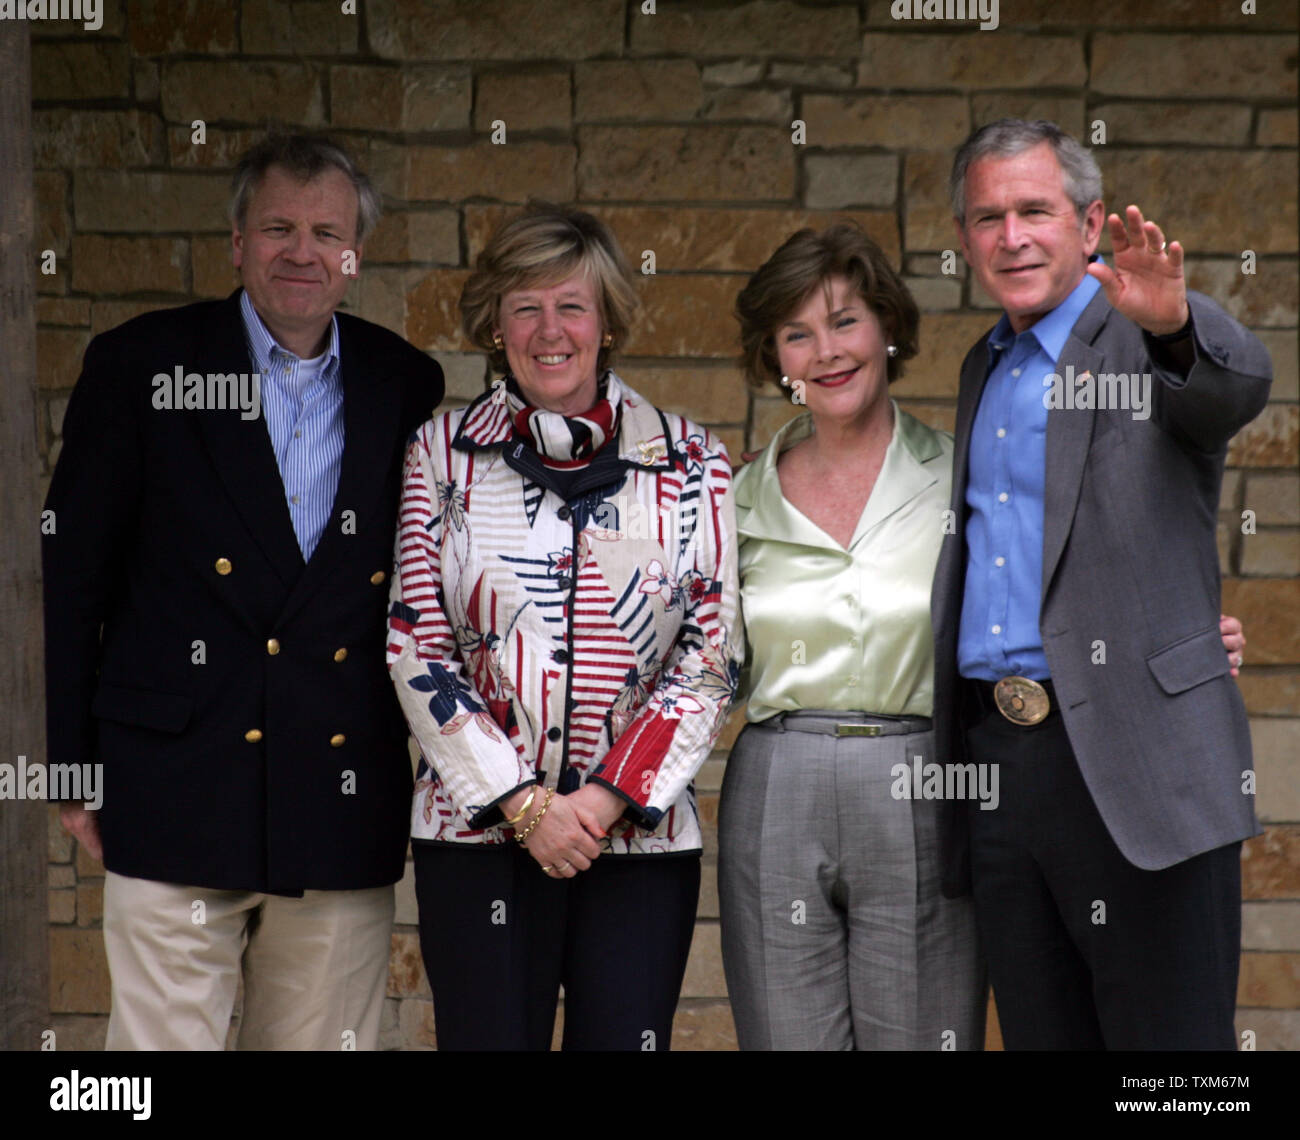 U.S. President George W. Bush (R), NATO Secretary General Jaap de Hoop Scheffer (L), First Lady Laura Bush (2nd-L) and Scheffer's wife Jaap de Hoop Scheffer pose for a photo-op following a meeting between Scheffer and Bush, at Bush's ranch in Crawford, Texas, May 21, 2007. (UPI Photo/Ron Russek II) Stock Photo